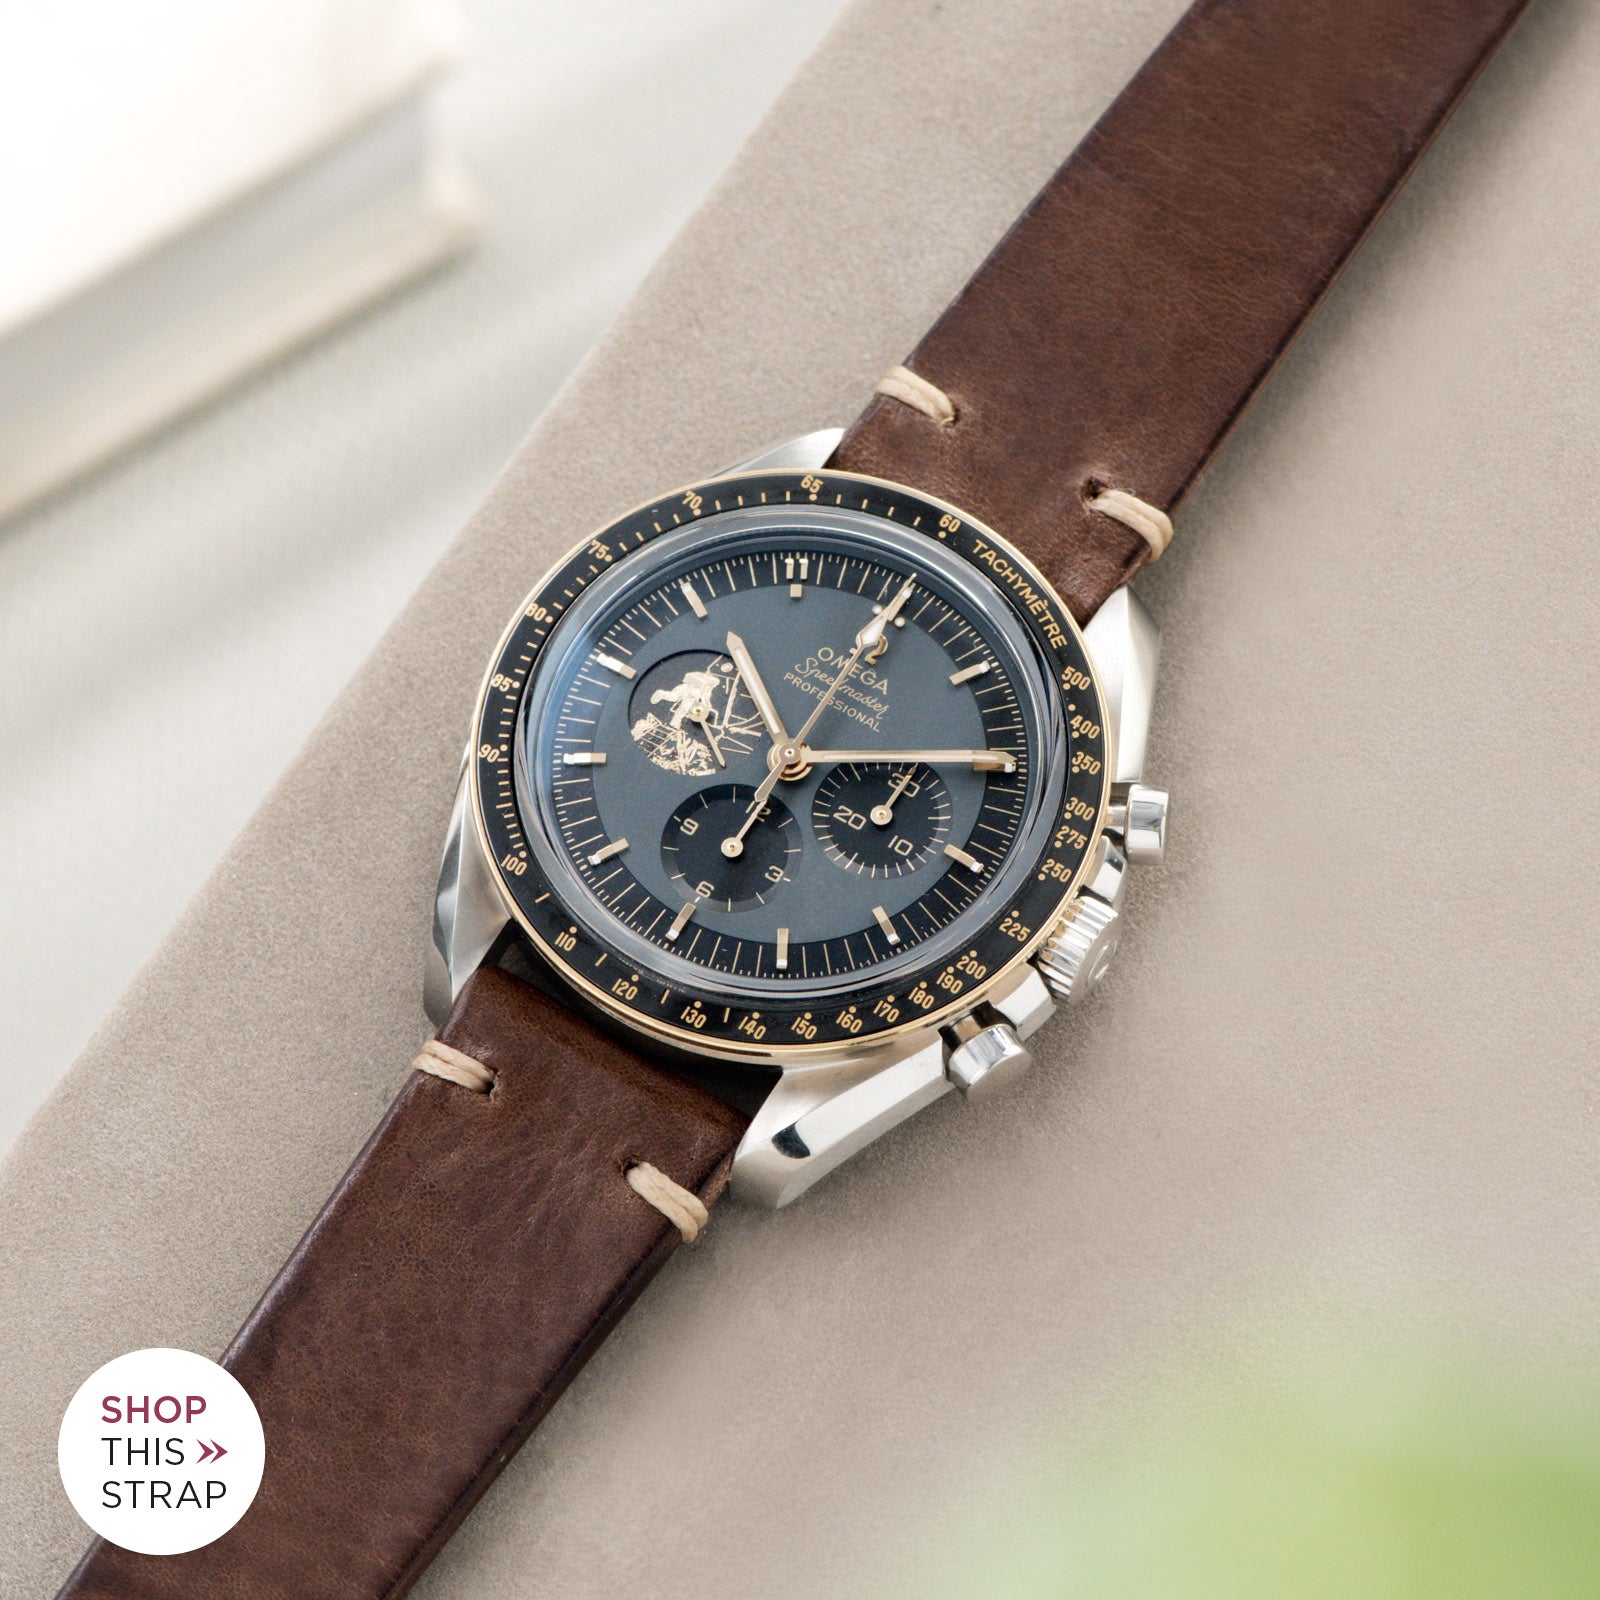 Bulang and Sons_Strap Guide_Omega Speedmaster Apollo 11 50TH Anniversary Watch_Lumberjack Brown Leather Watch Strap